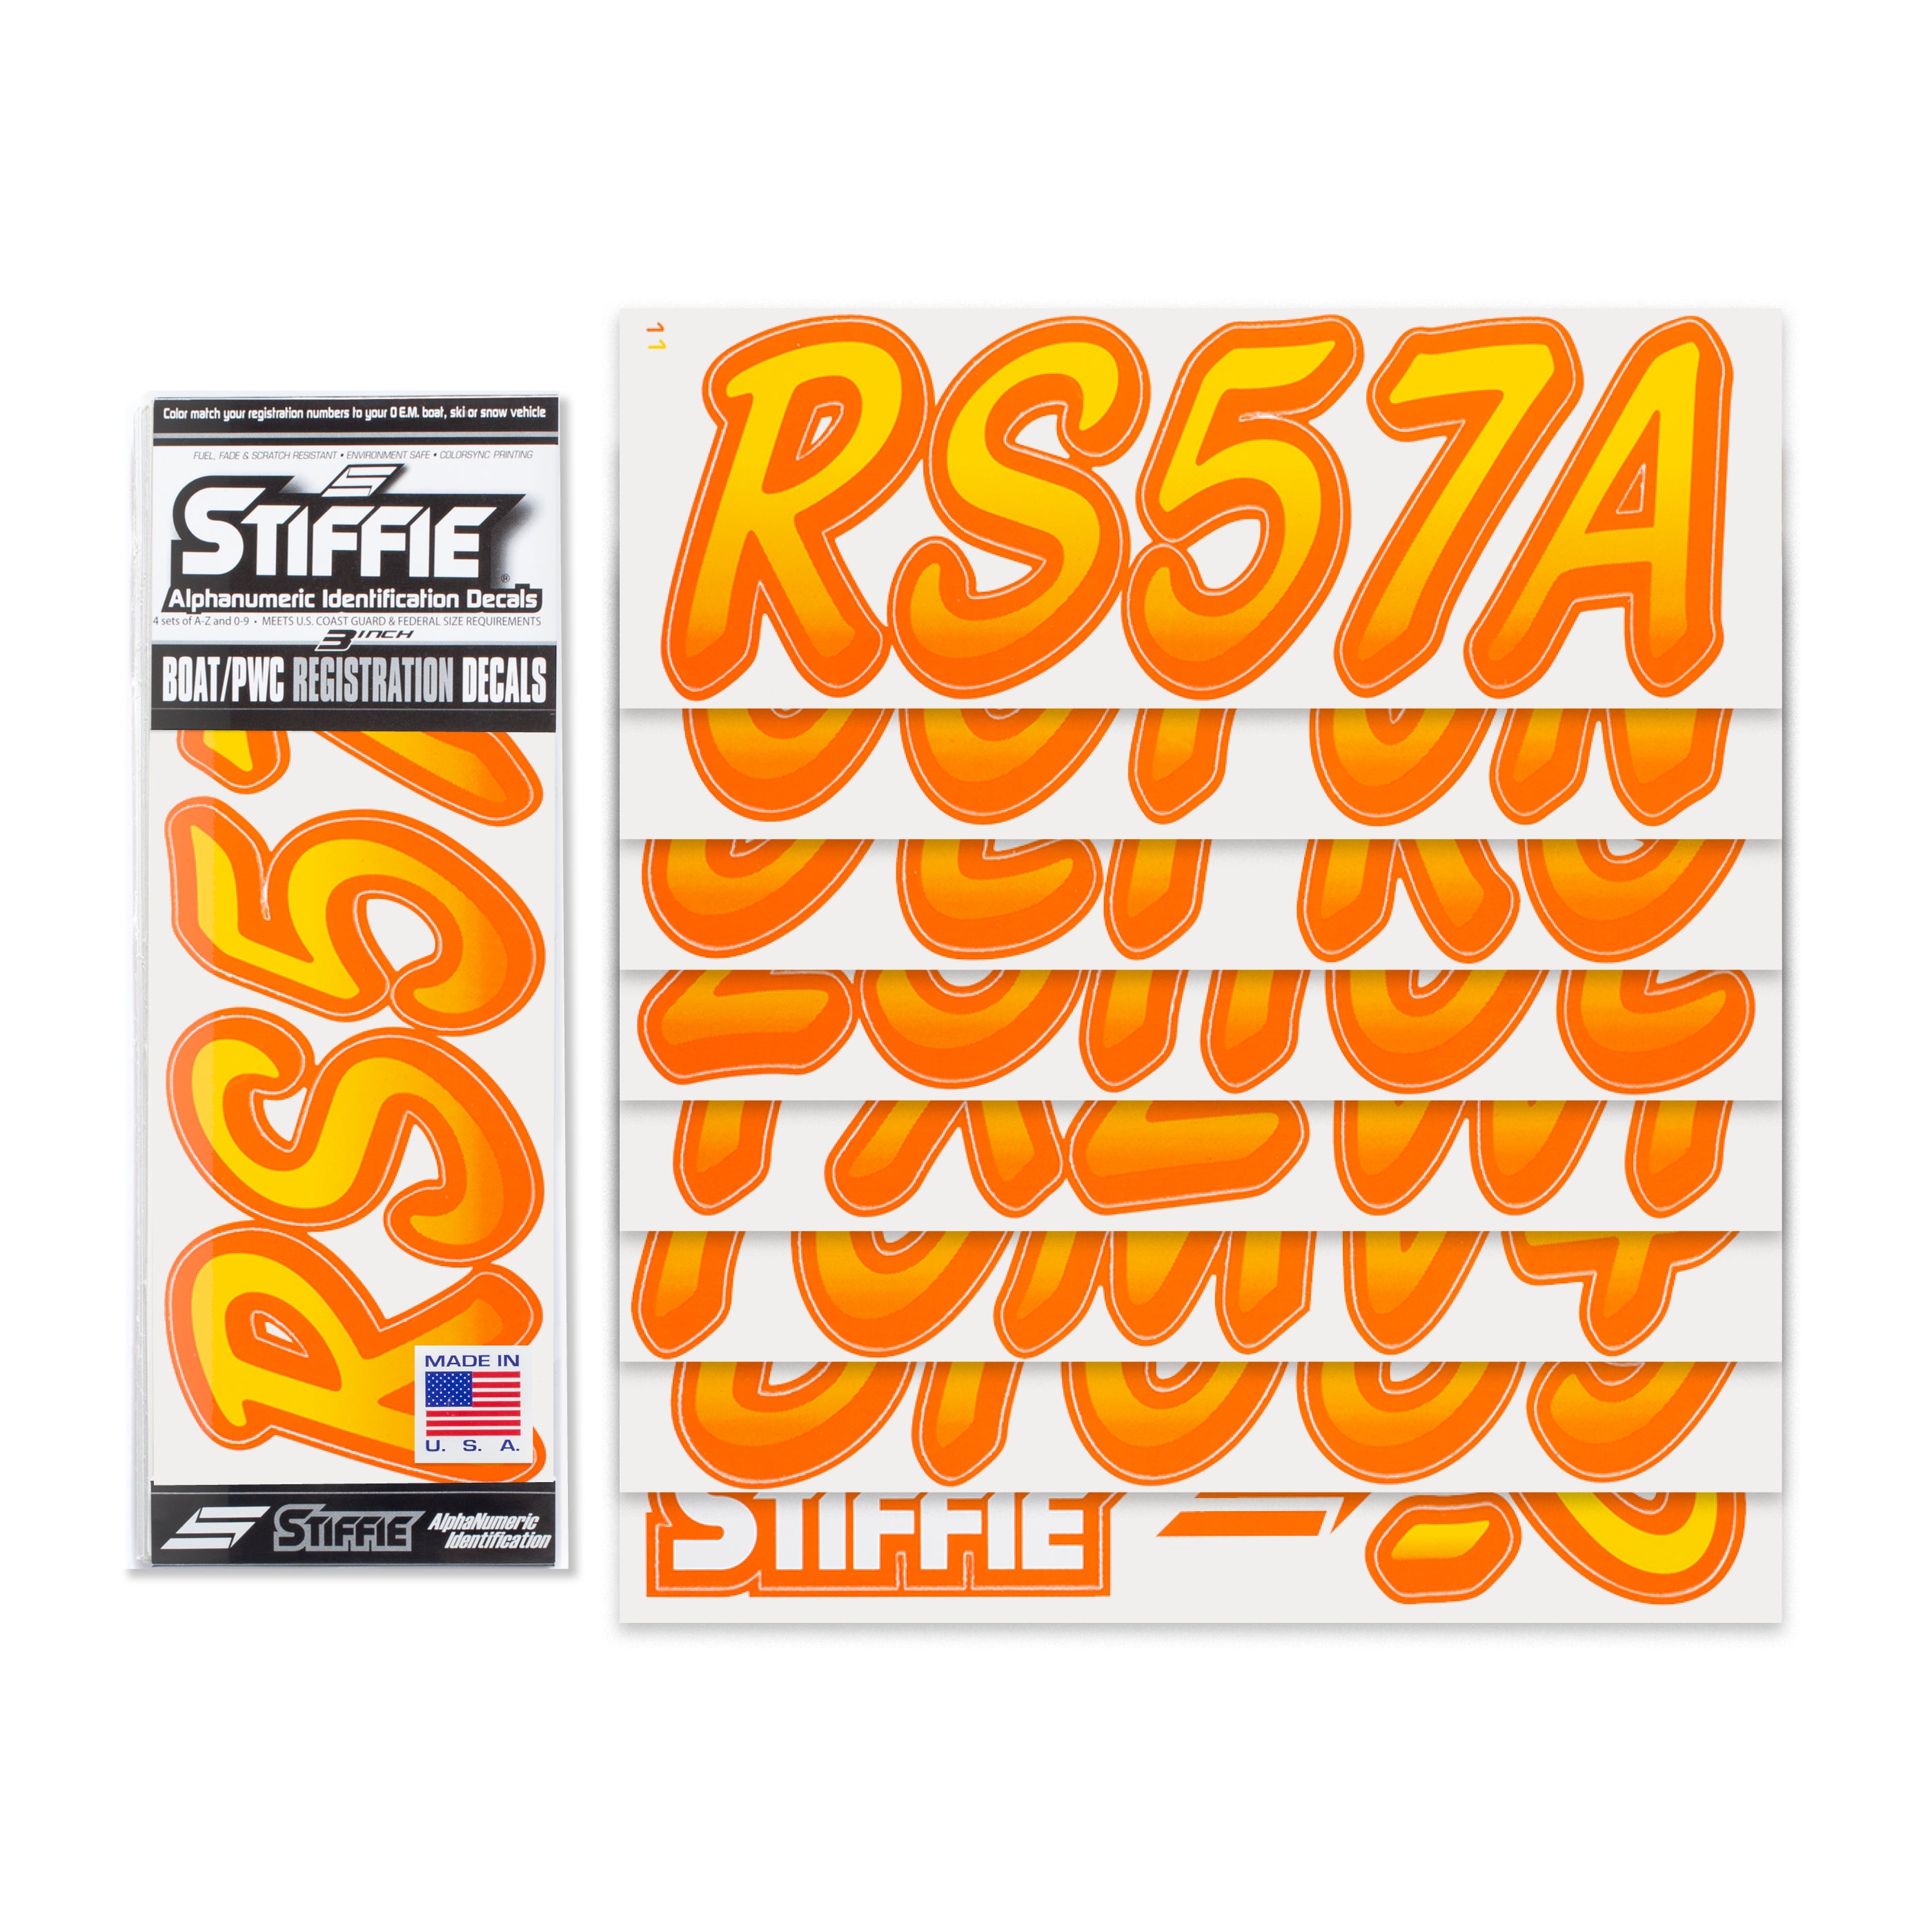 Stiffie Whipline Yellow/Orange 3" Alpha-Numeric Registration Identification Numbers Stickers Decals for Boats & Personal Watercraft